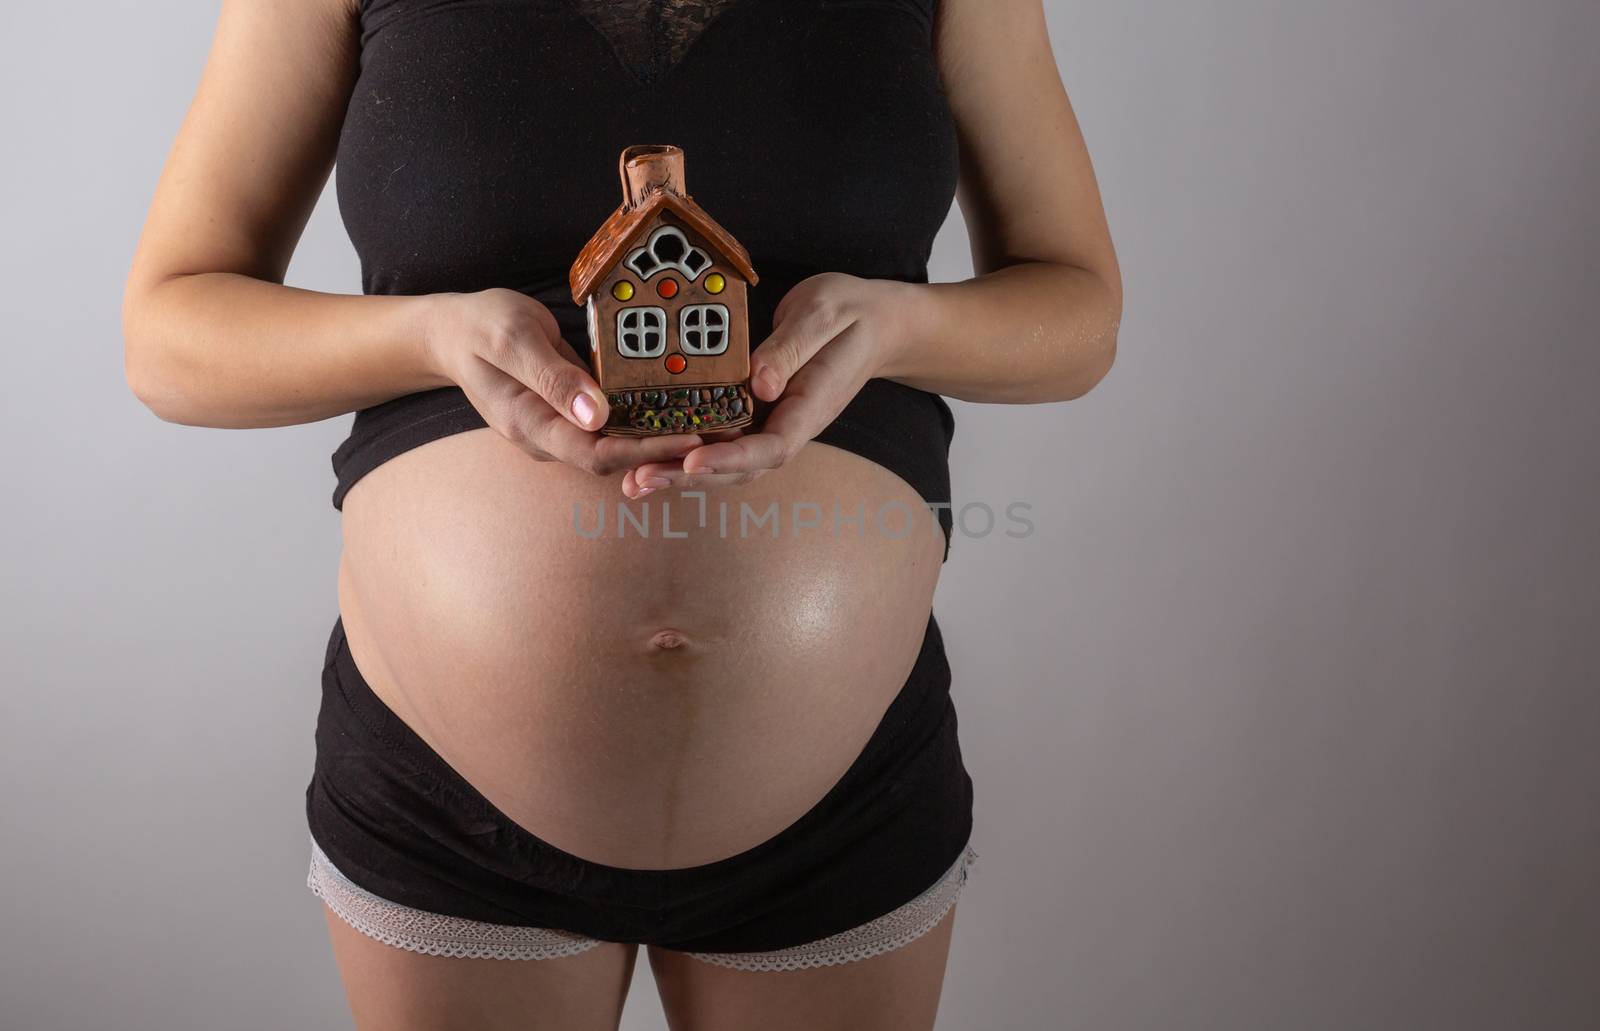 Getting a home loan while pregnant